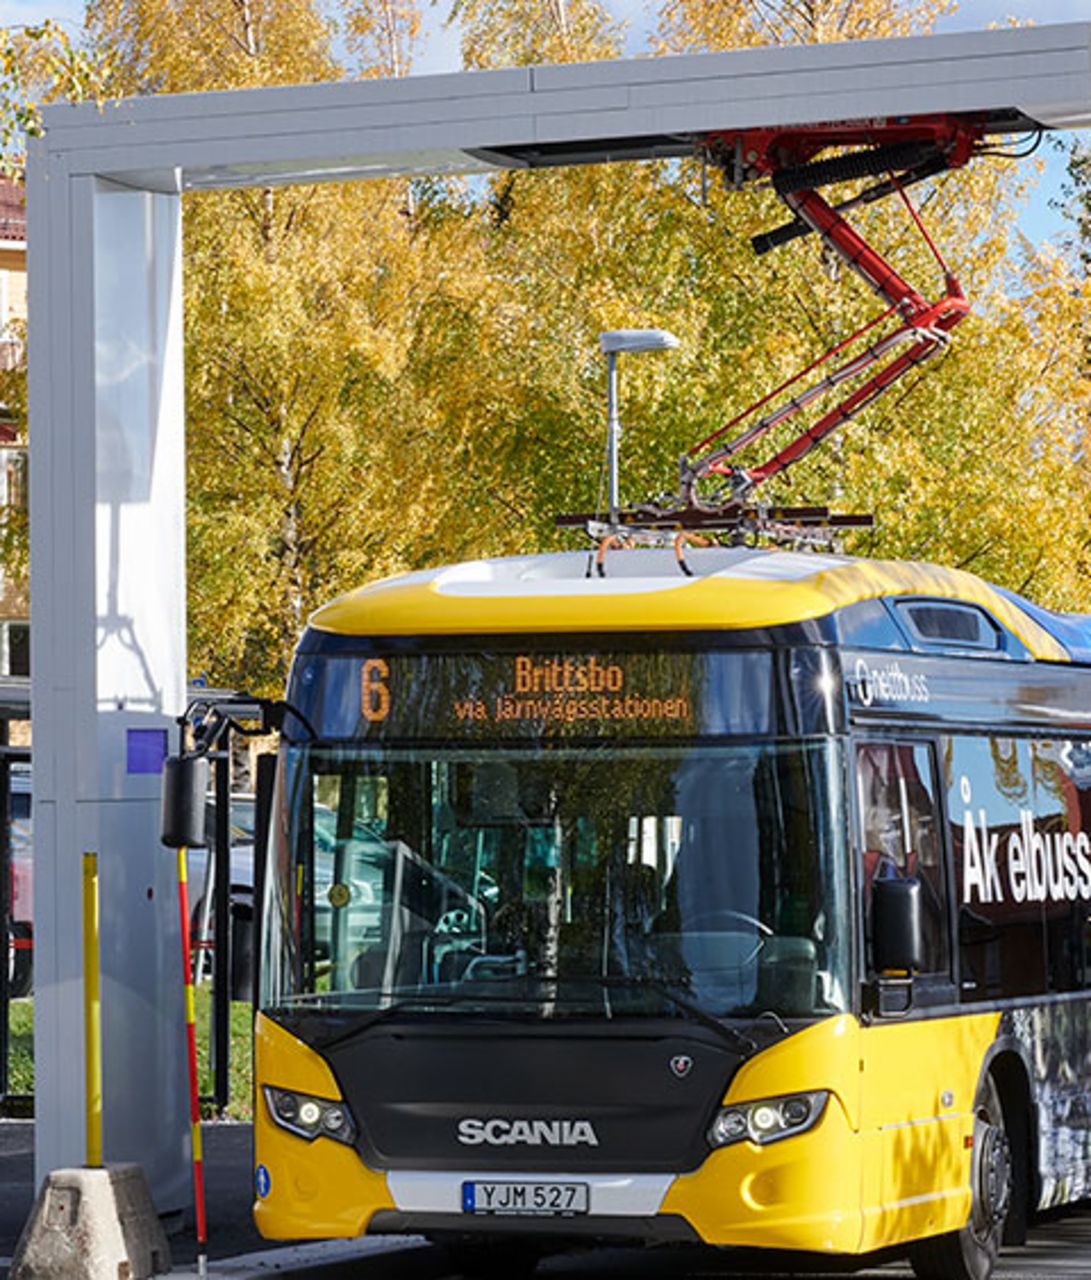 At the end of the line, the buses are charged for 6 to 8 minutes, using pantographs, before making the return journey and being charged again.